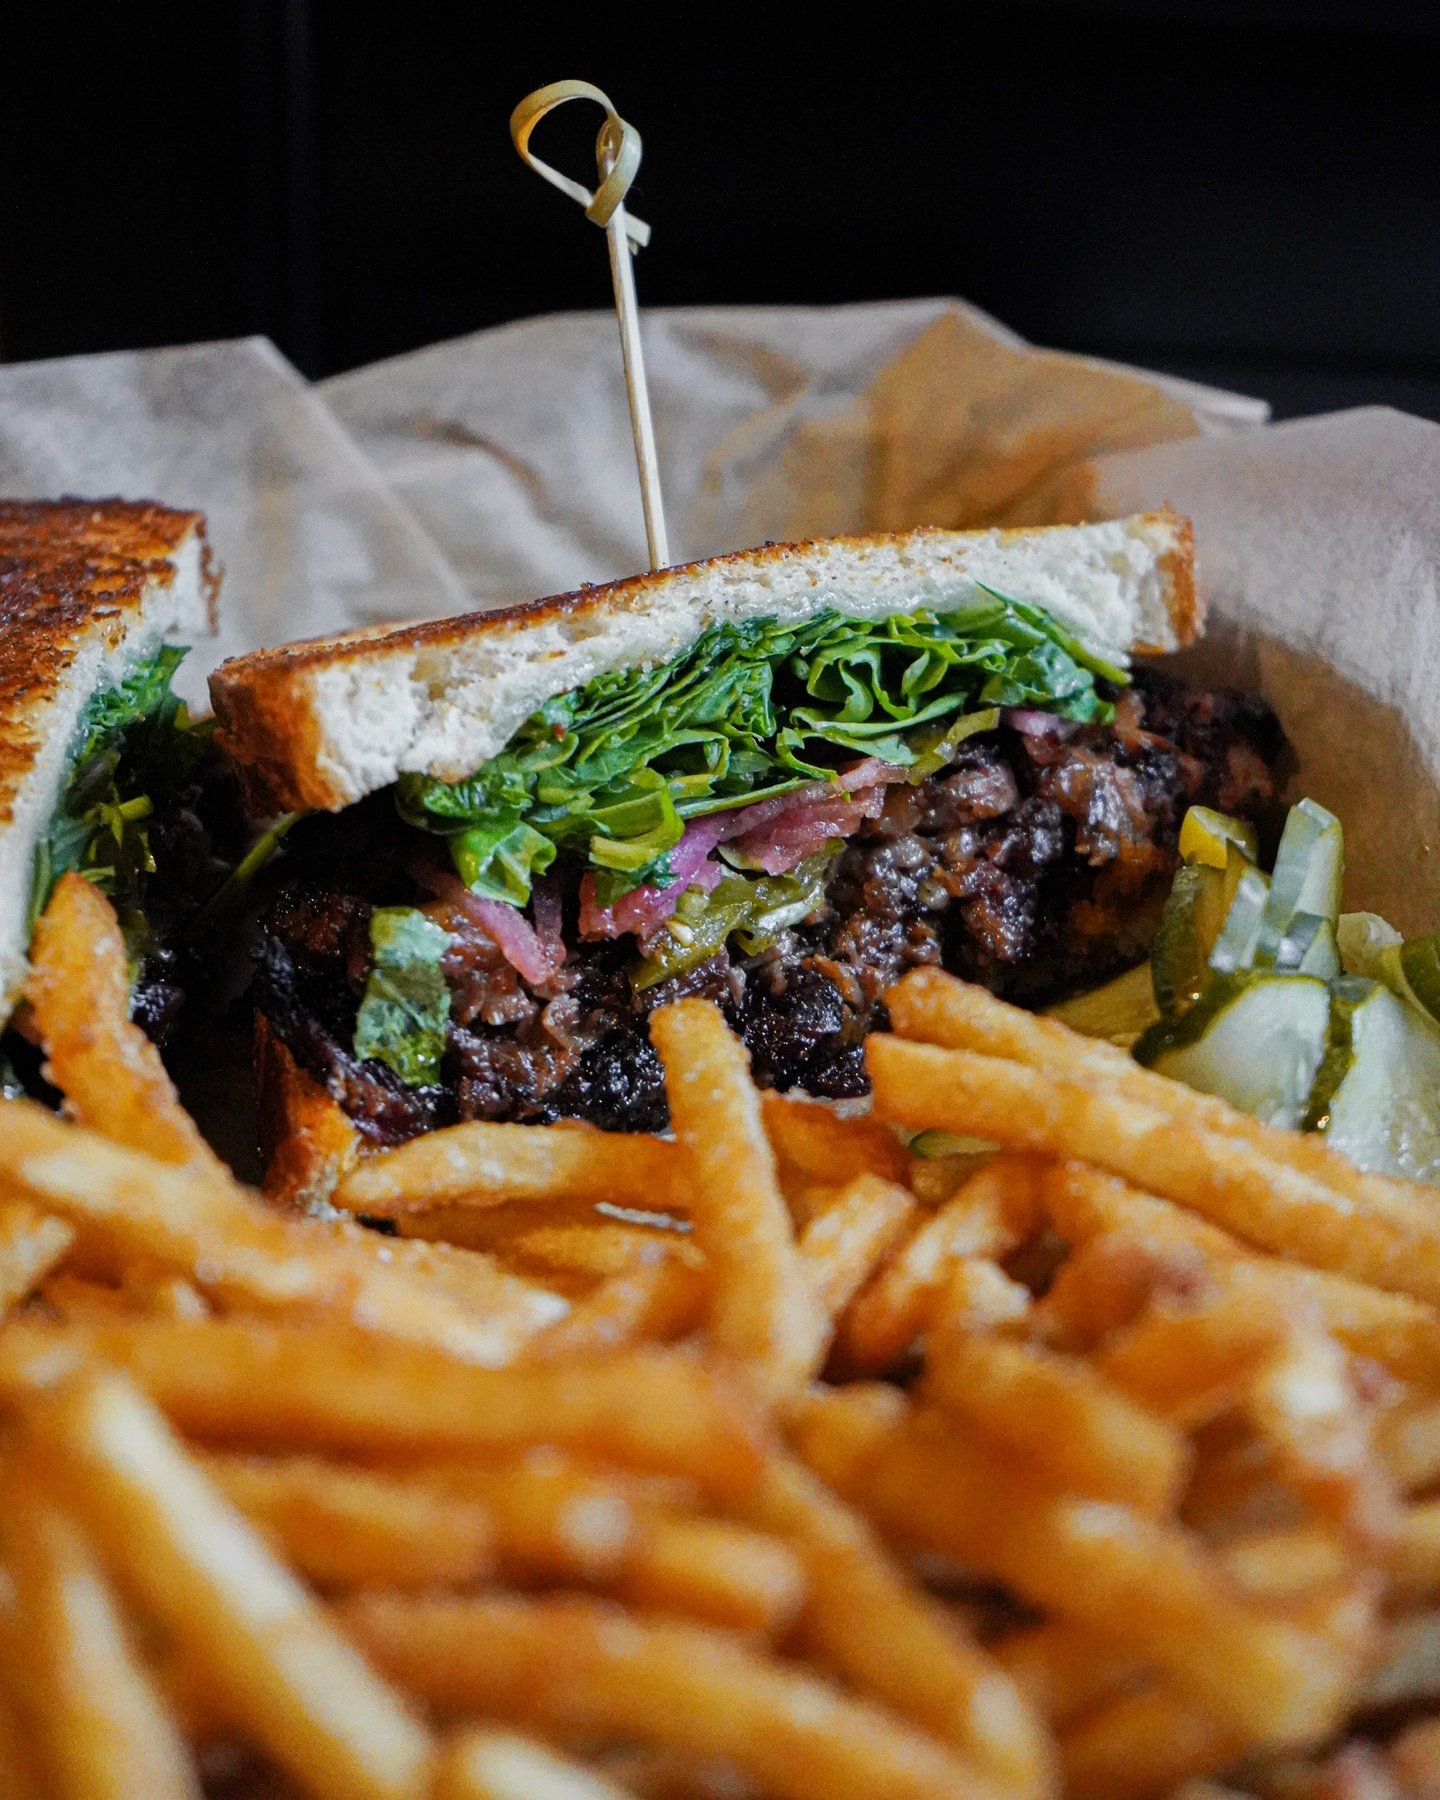 Eyes on the prize! 👀 

...and the fries 🍟 

Smoked Brisket Sandwich | Maple BBQ Glaze, Pickled Jalape&ntilde;o Slaw, Vermont Cheddar, Toasted Sourdough, Fries

Are you upgrading these fries to truffle parm? 😋 
.
.
.
#ct #connecticut #ctrestaurants